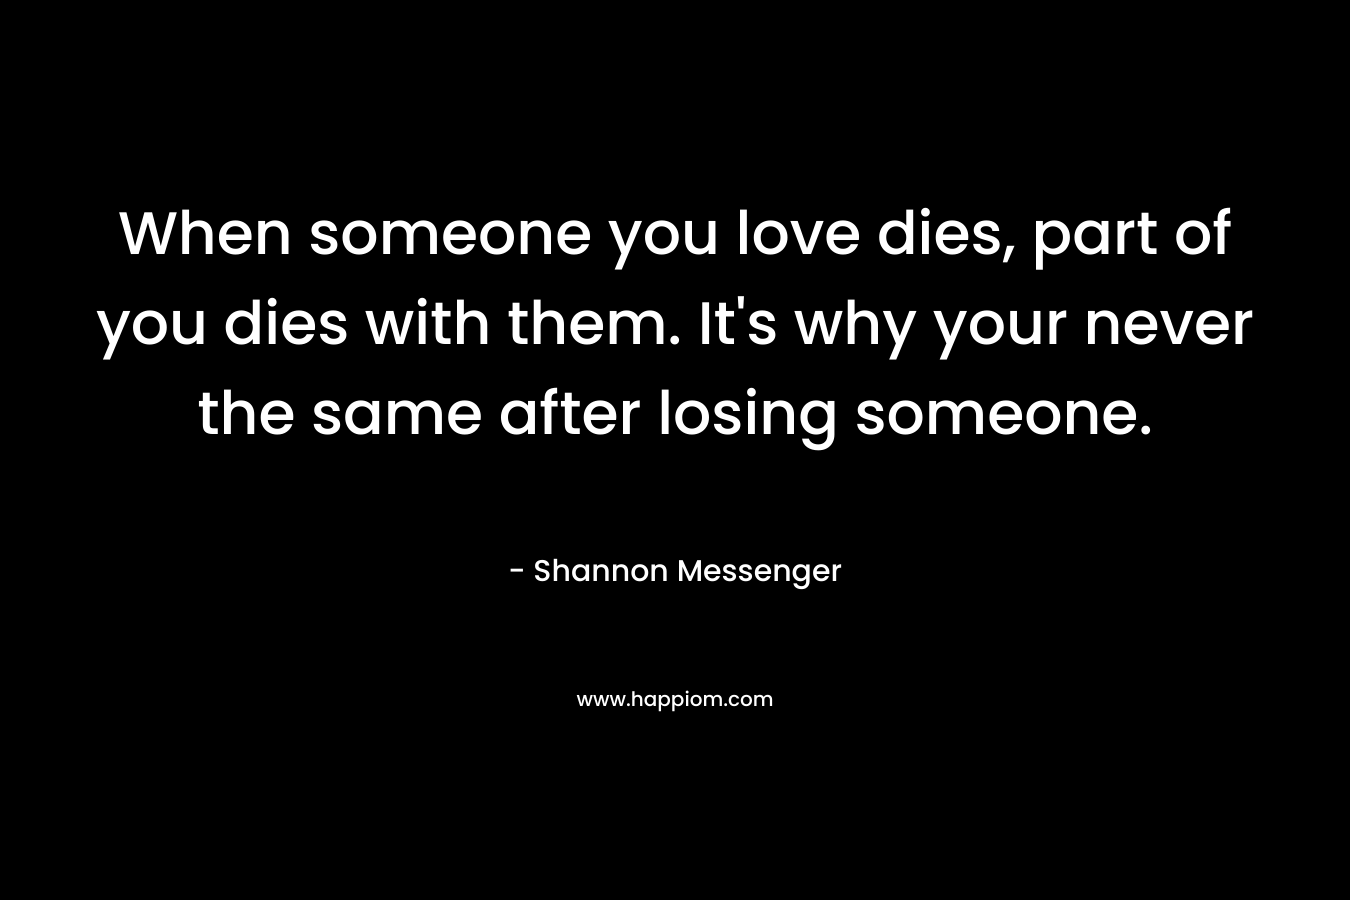 When someone you love dies, part of you dies with them. It's why your never the same after losing someone.